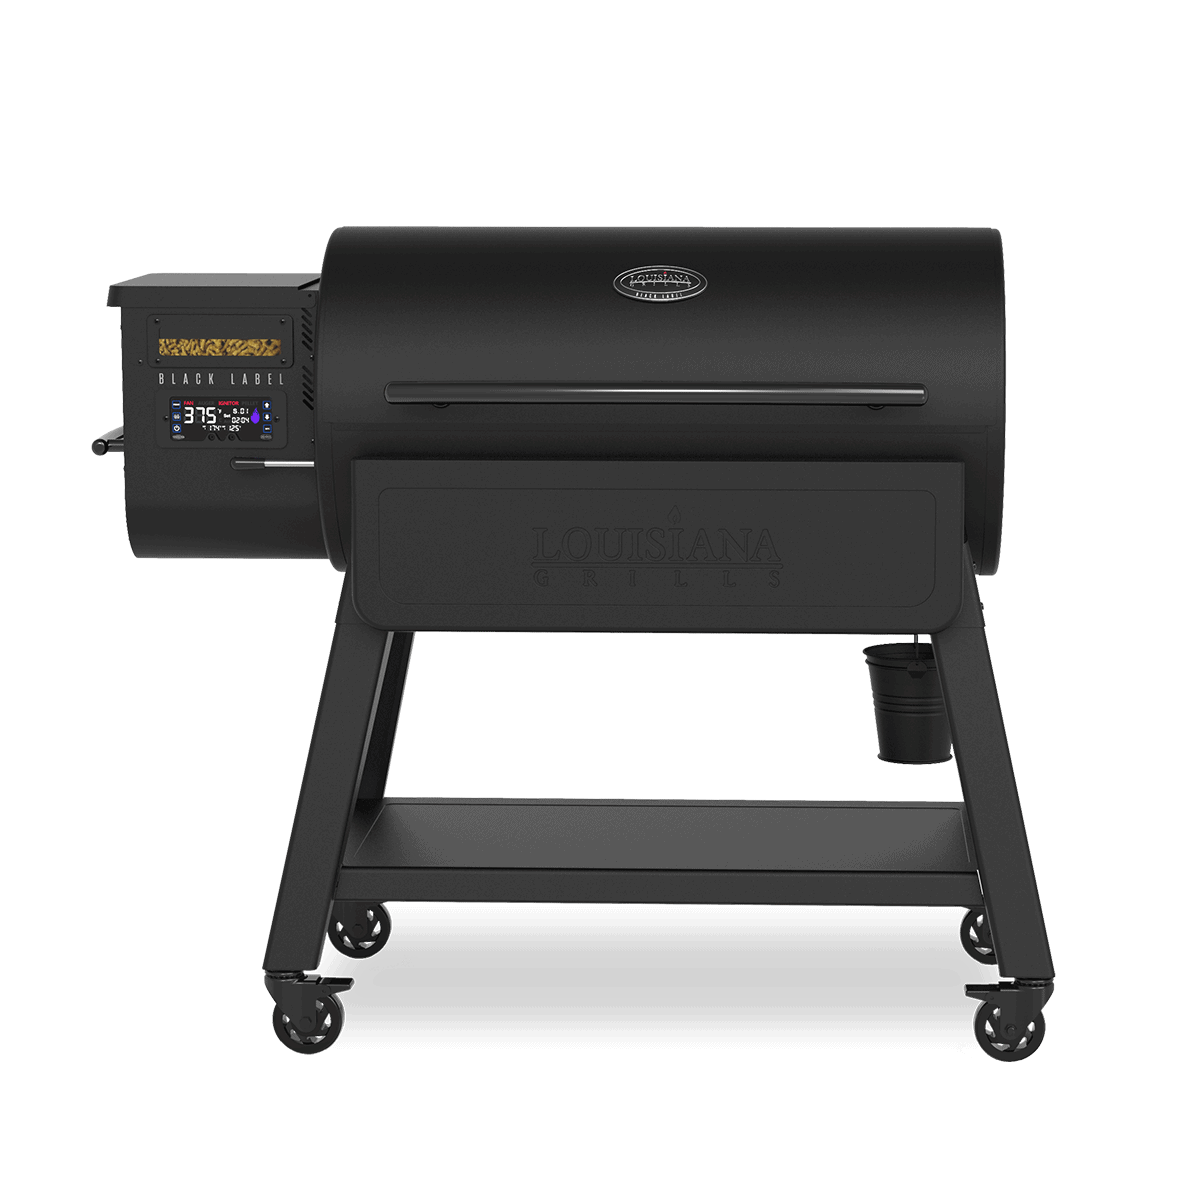 1200 Black Label Series Grill with Wifi Control